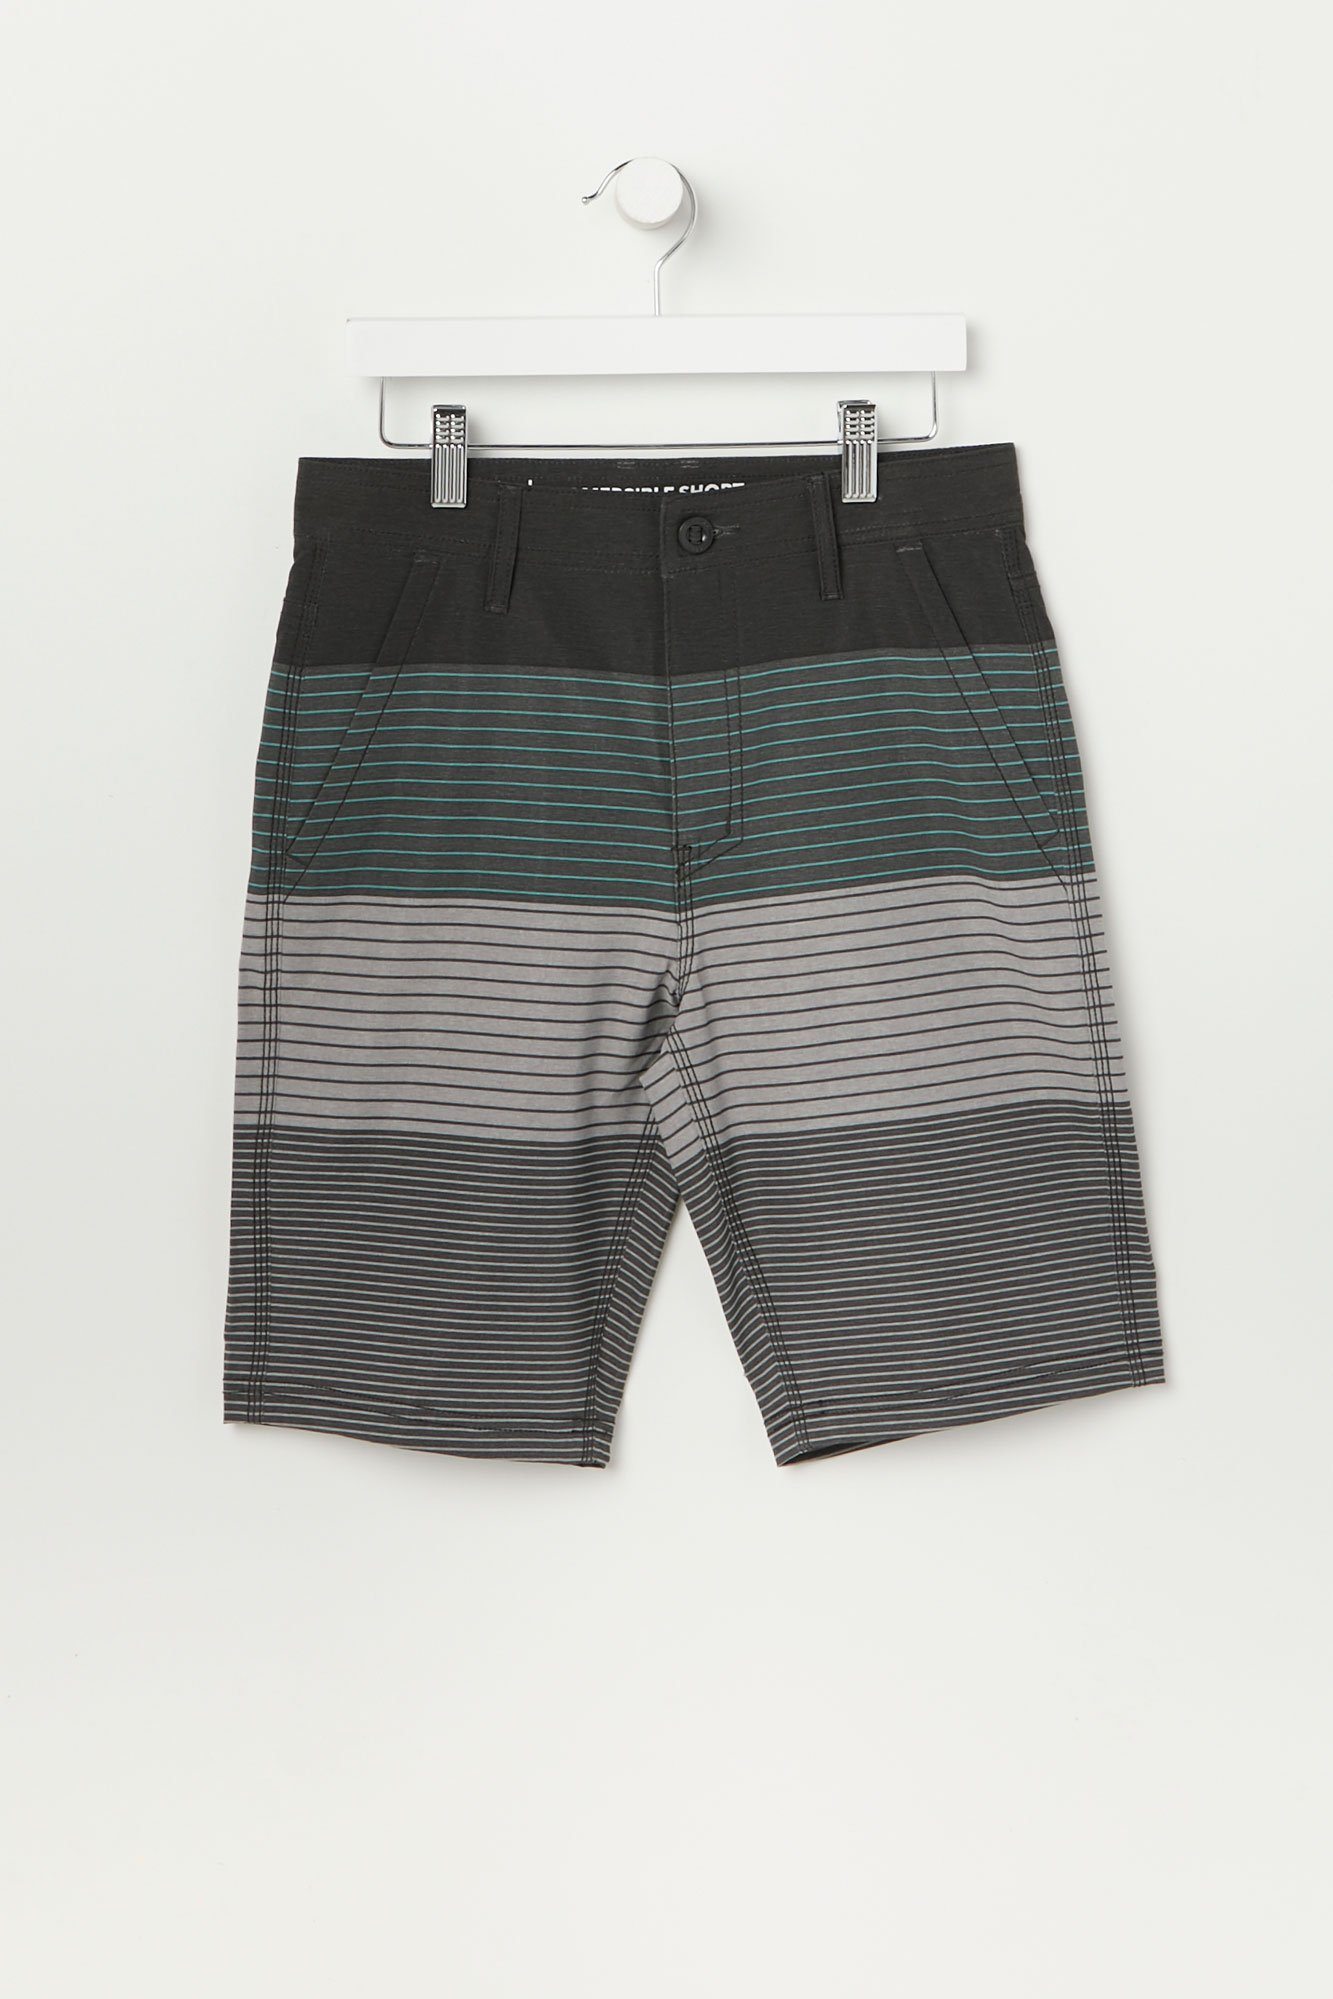 Image of West49 Youth Striped Submersible Short